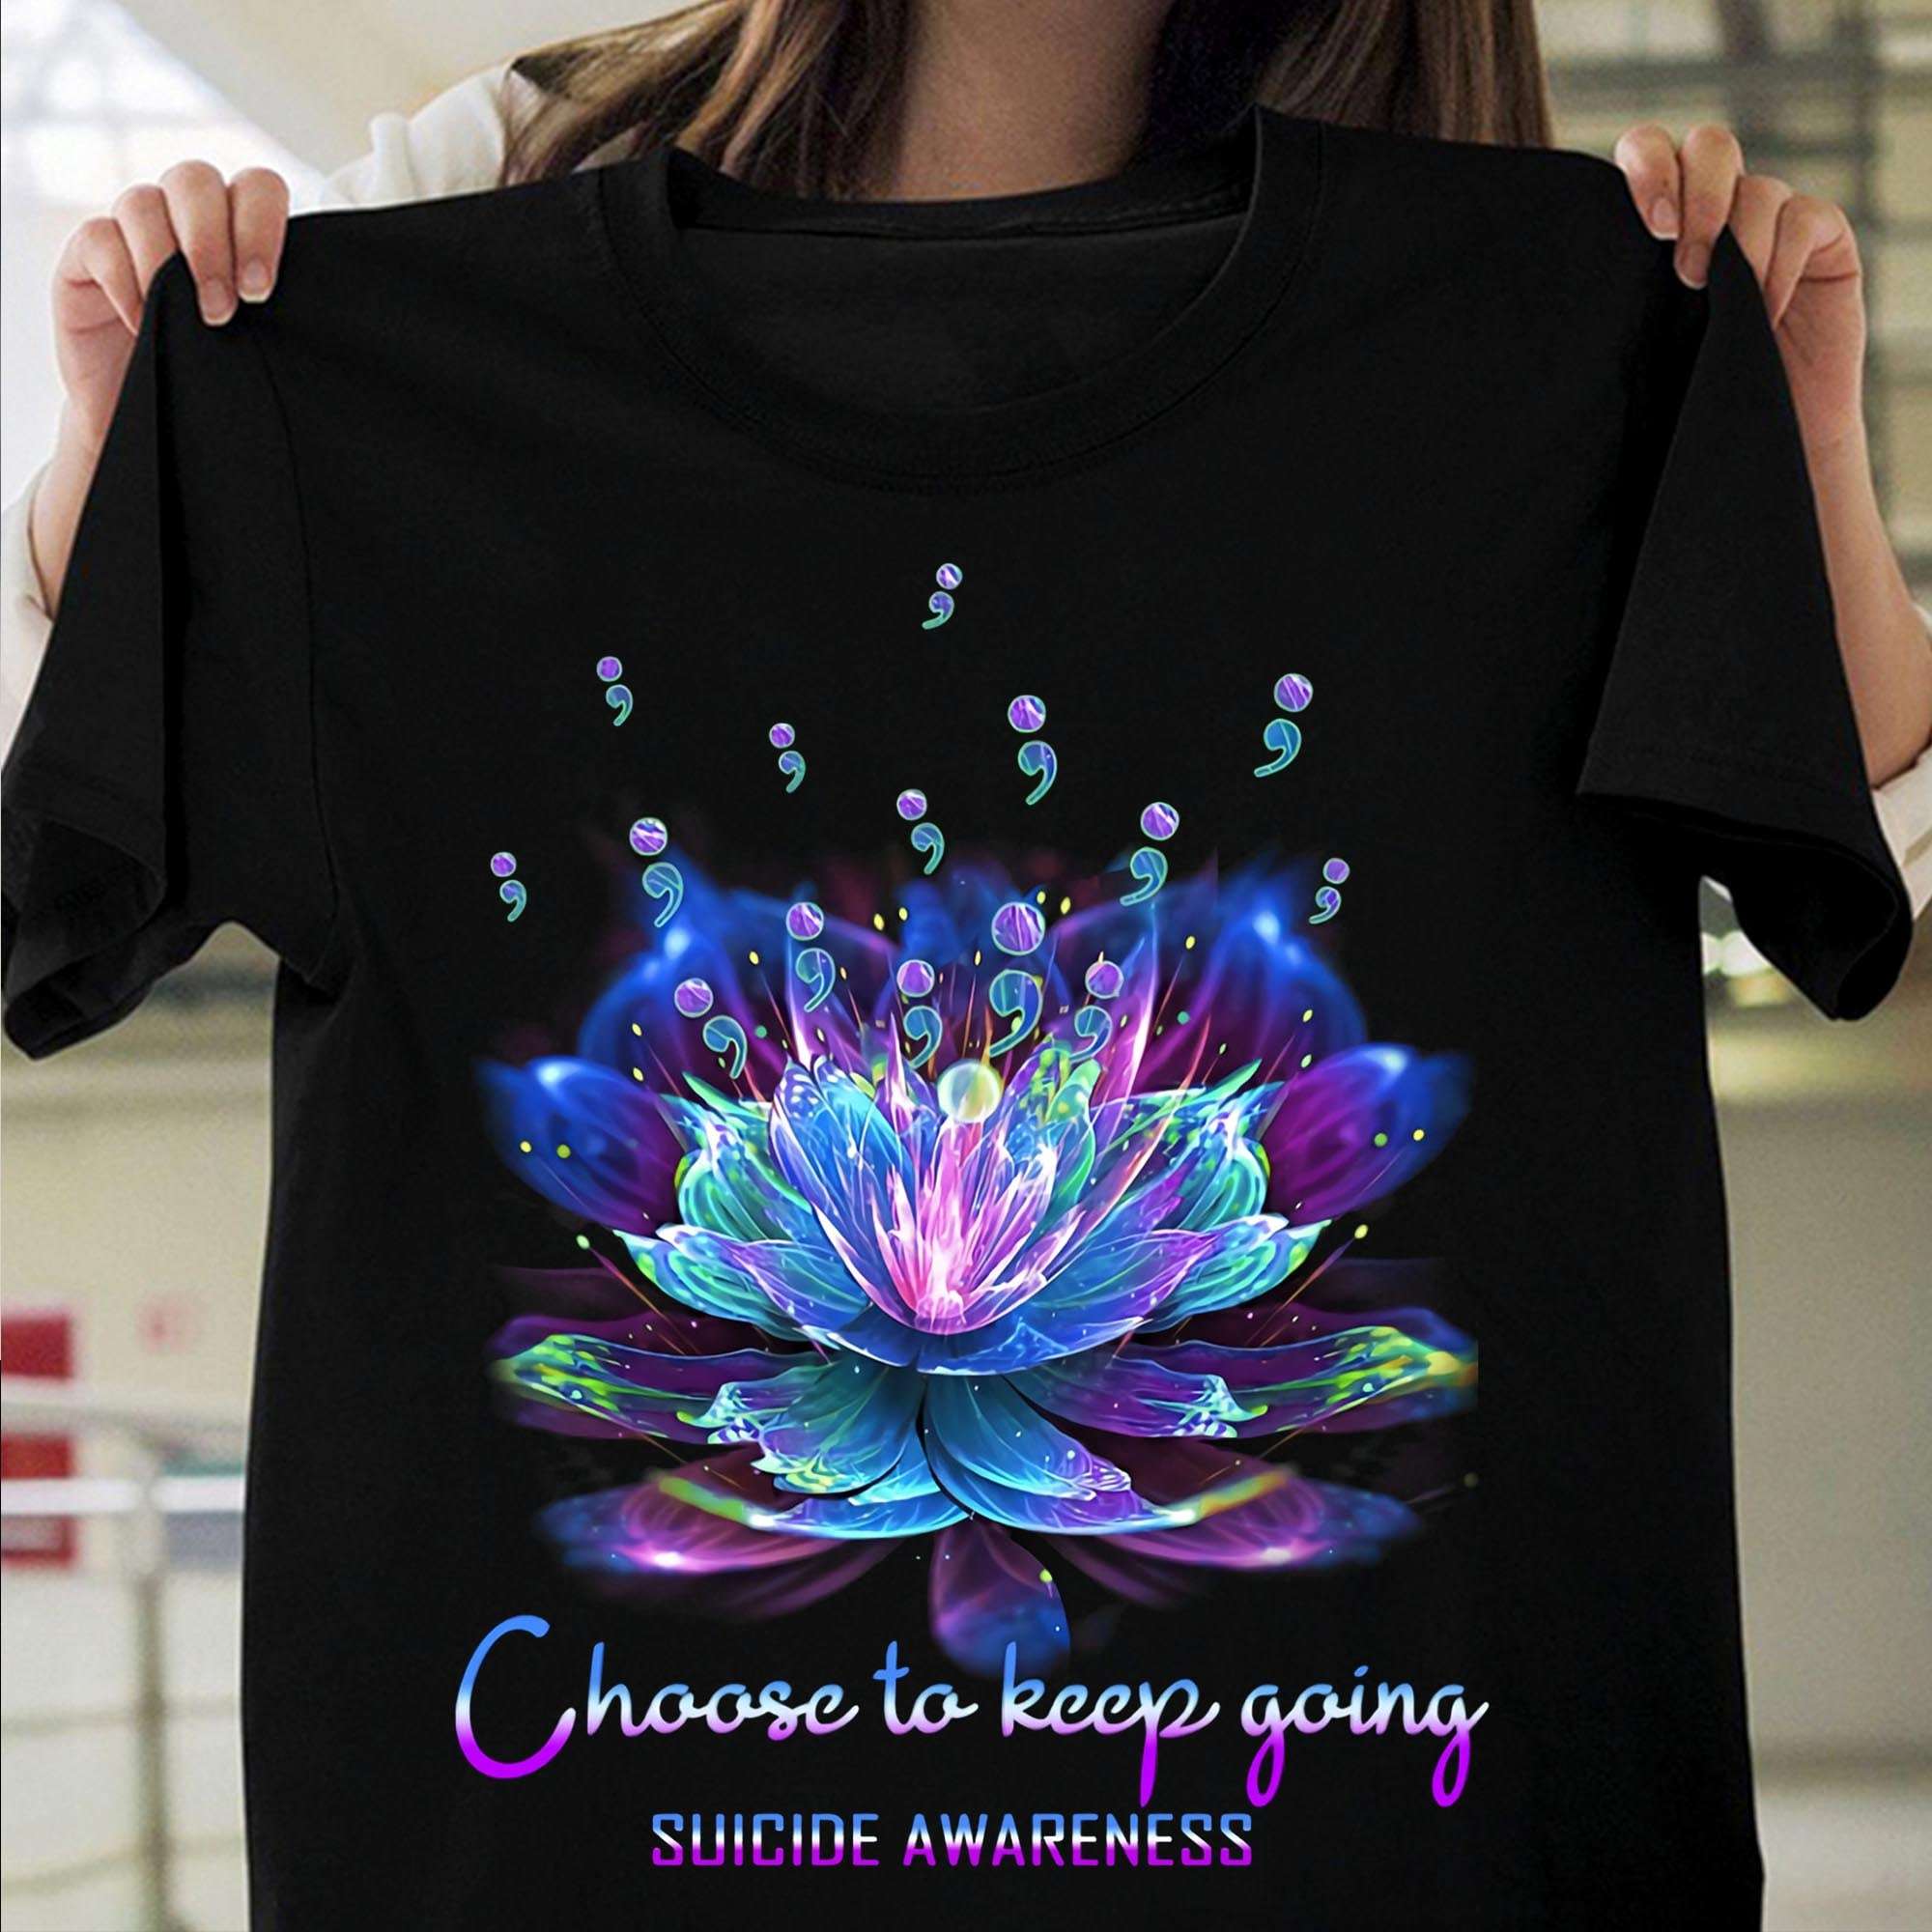 Suicide Lotus Flower - Choose to keep going suicide awareness